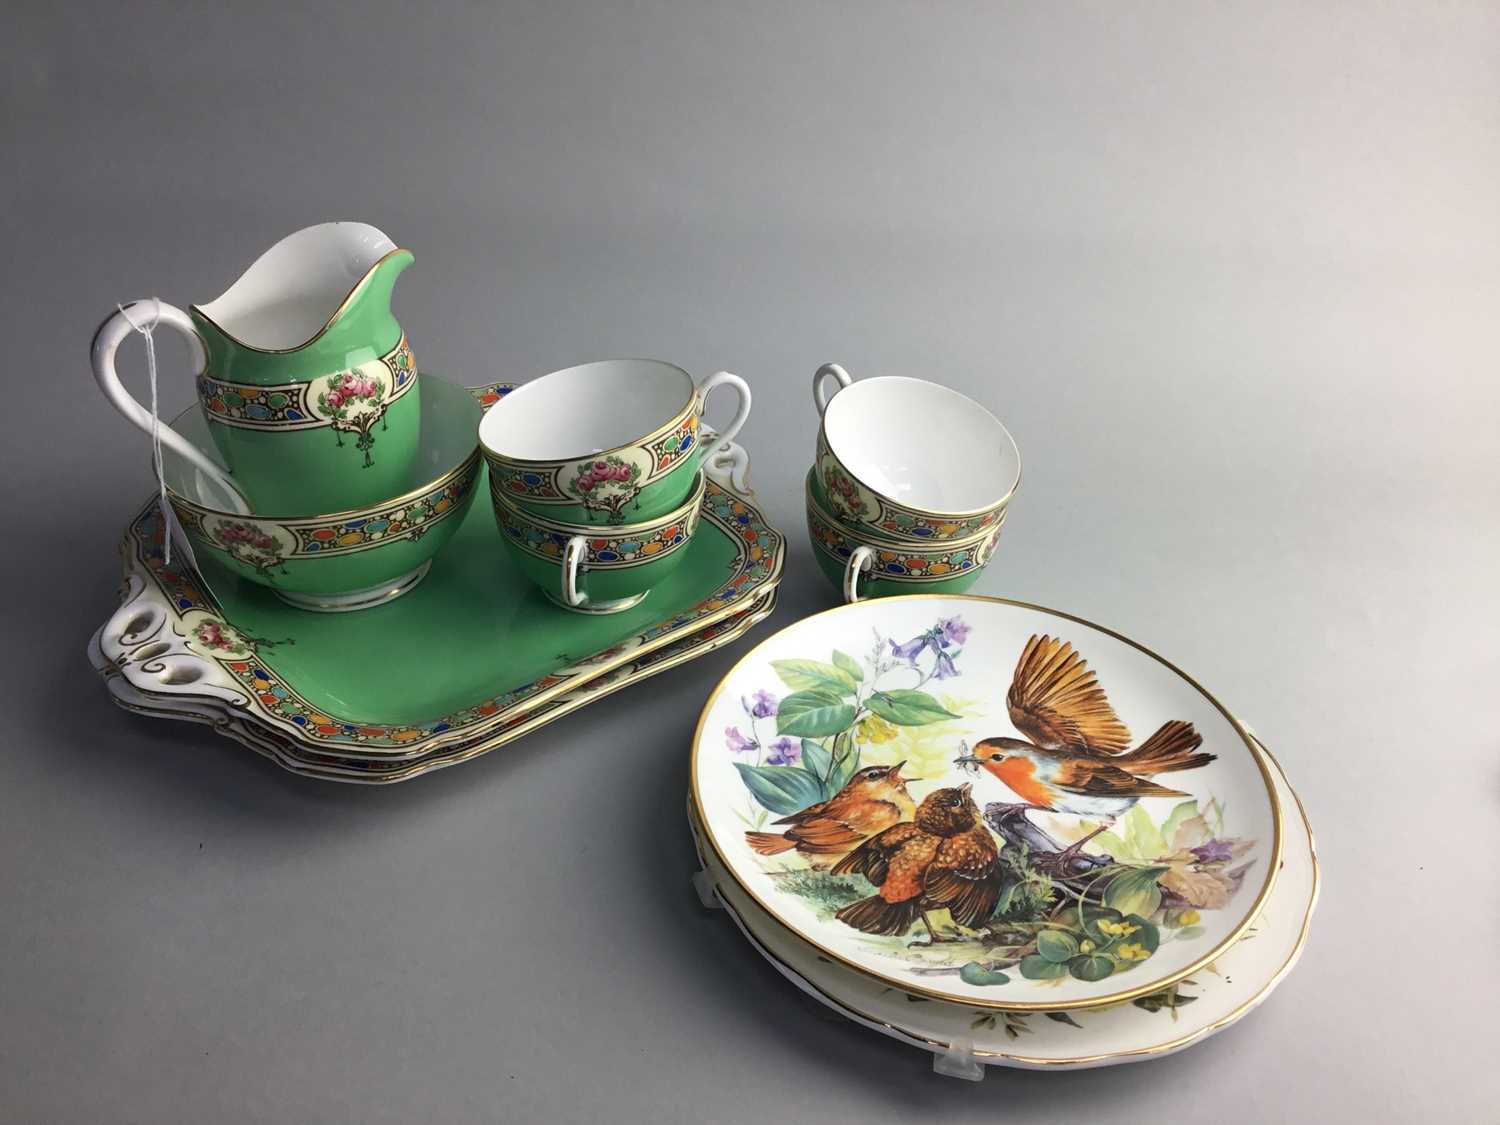 Lot 10 - AN EARLY 20TH CENTURY ROYAL WORCESTER TEA SERVICE